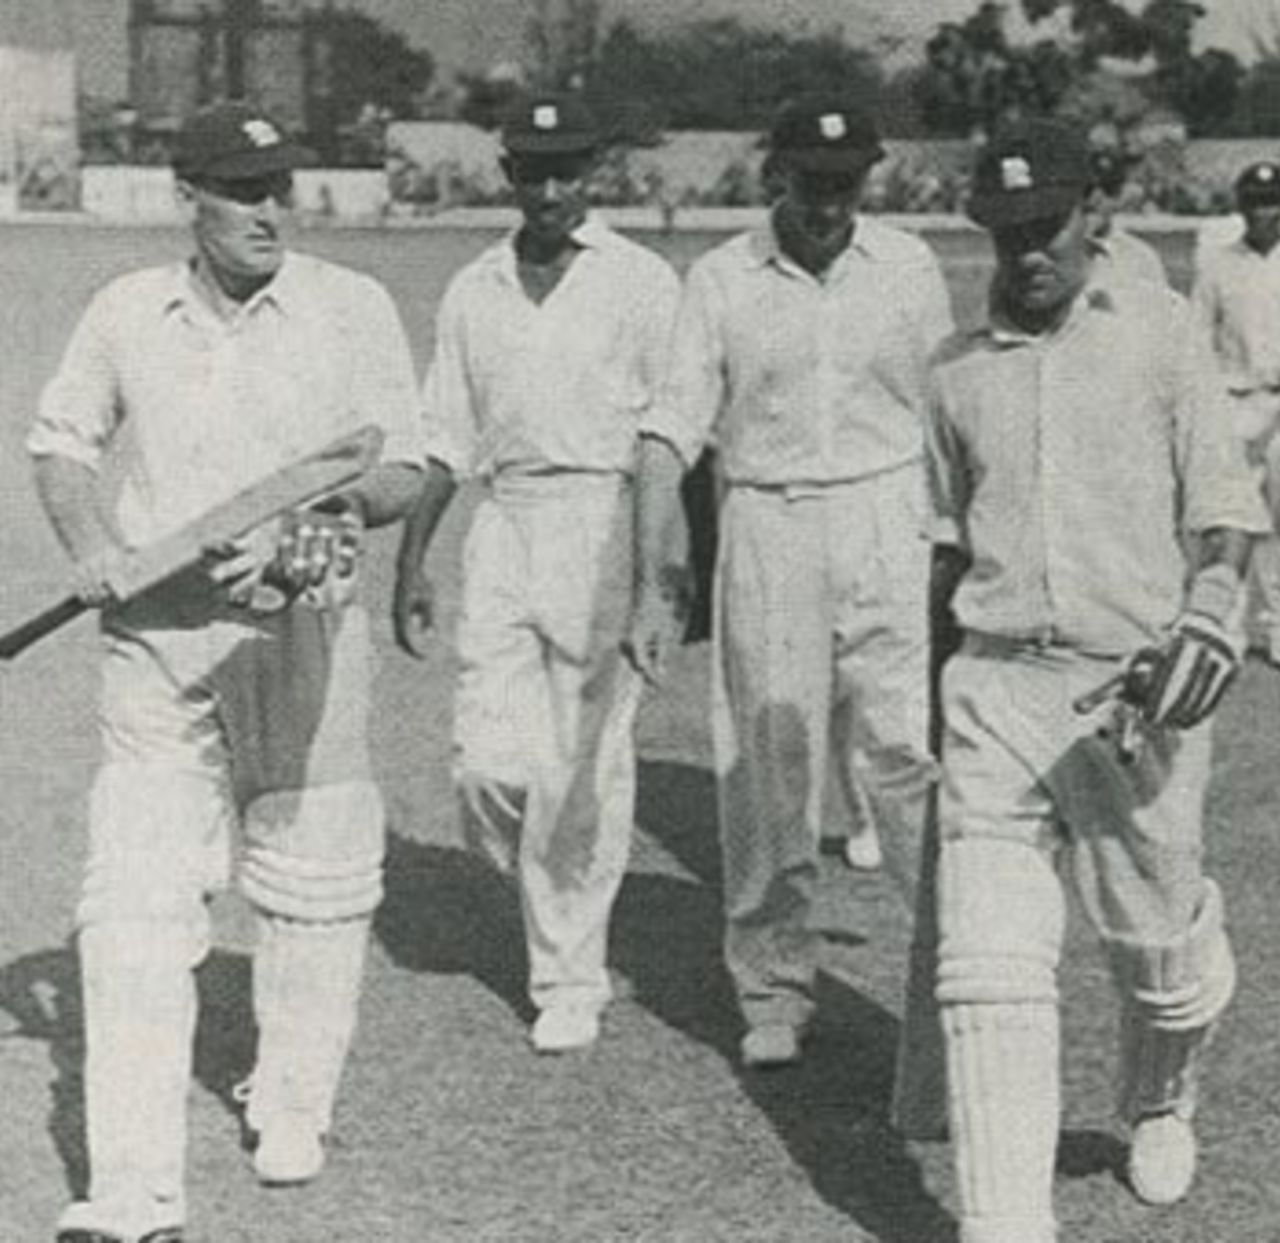 Len Hutton, having recorded the highest score by an England captain in a Test match of 205, and Johnny Wardle return to the pavilion for the tea interval during their seventh-wicket partnership of 102 in the fifth Test at Sabina Park, Jamaica, eventually won by England to square the series, March 1954